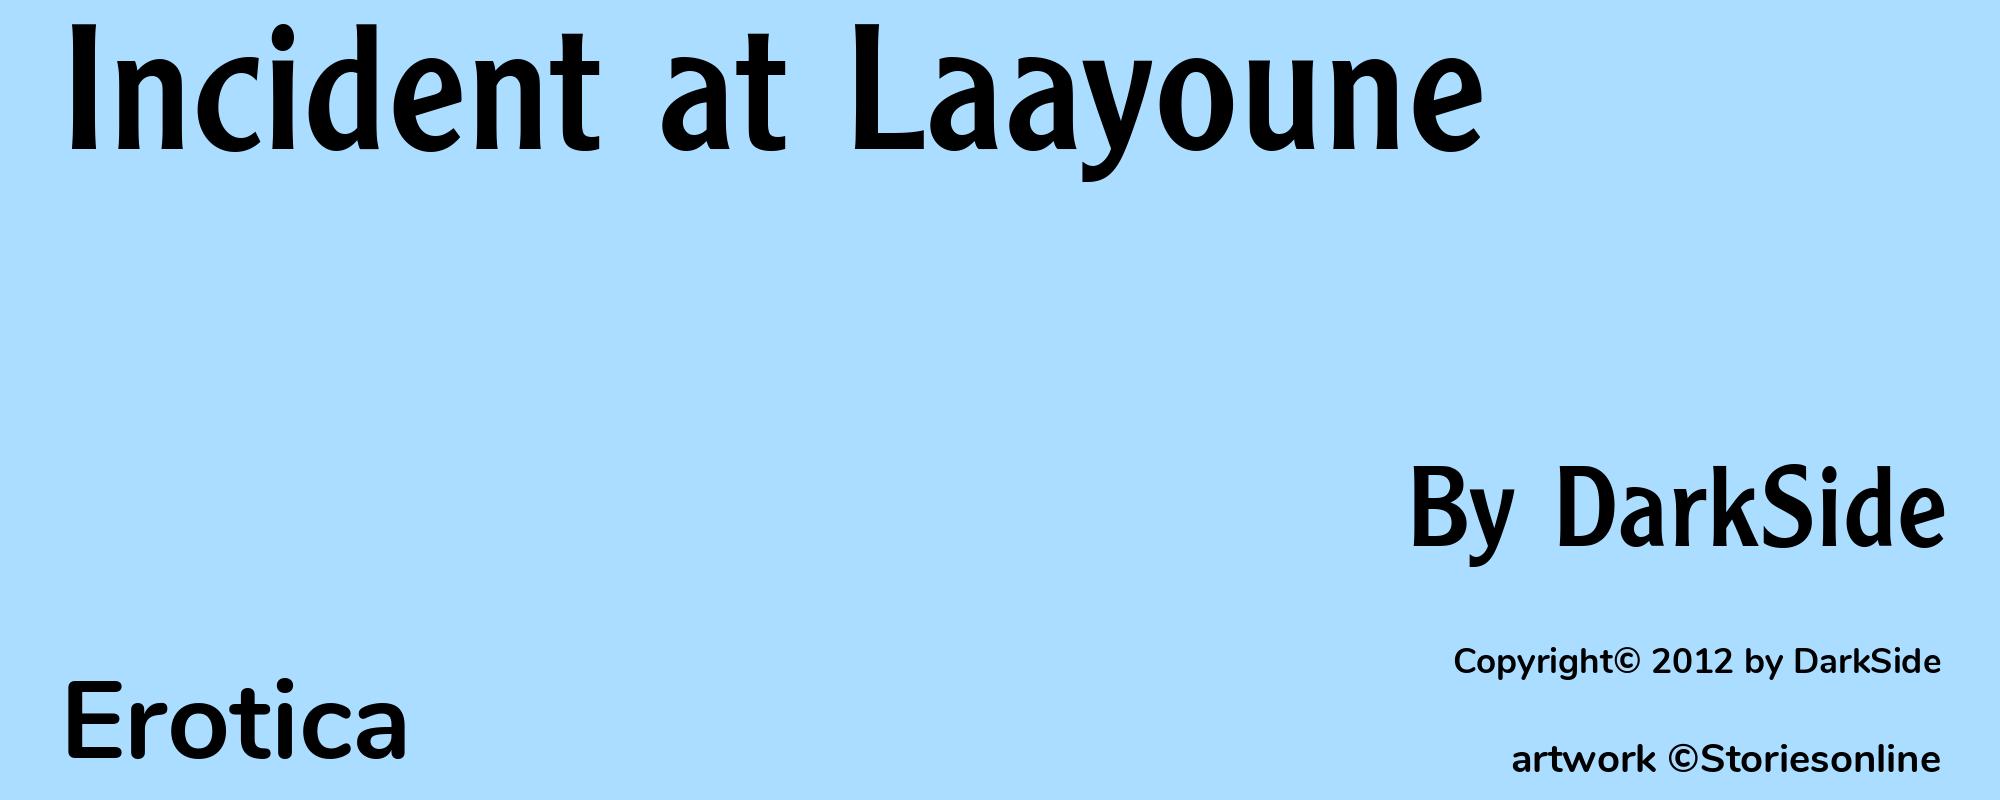 Incident at Laayoune - Cover